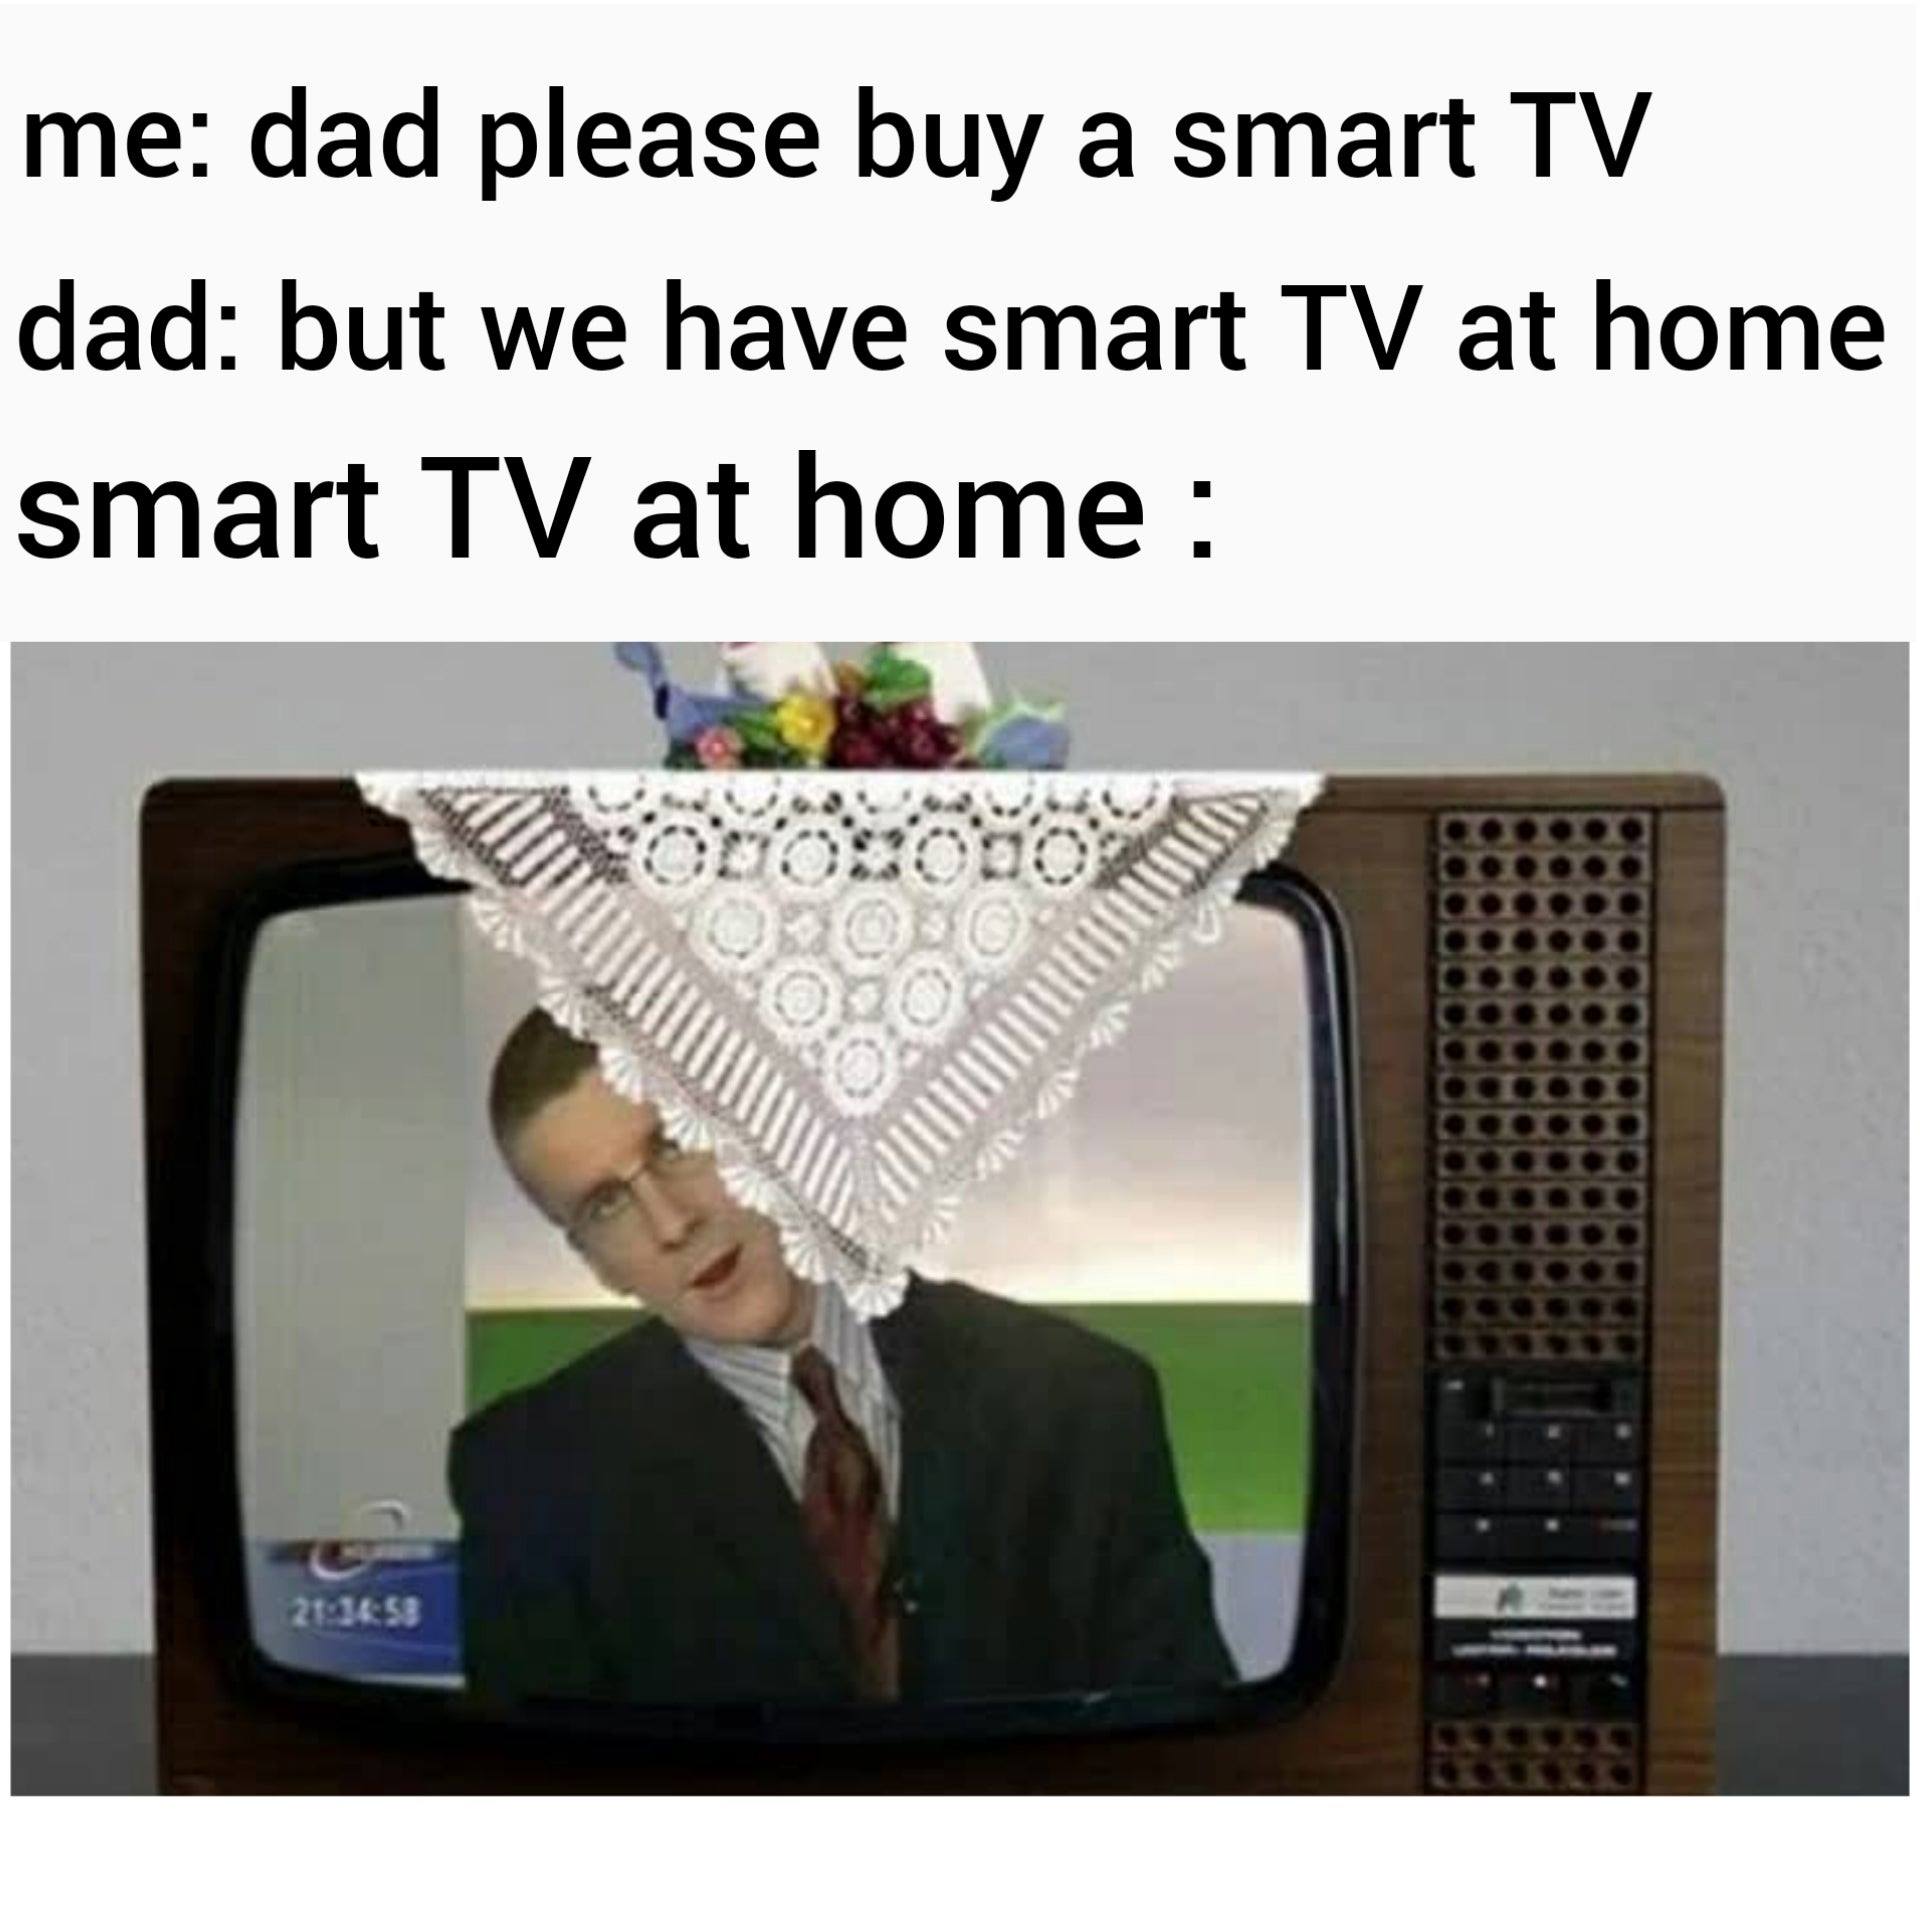 doily on tv - me dad please buy a smart Tv dad but we have smart Tv at home smart Tv at home 02